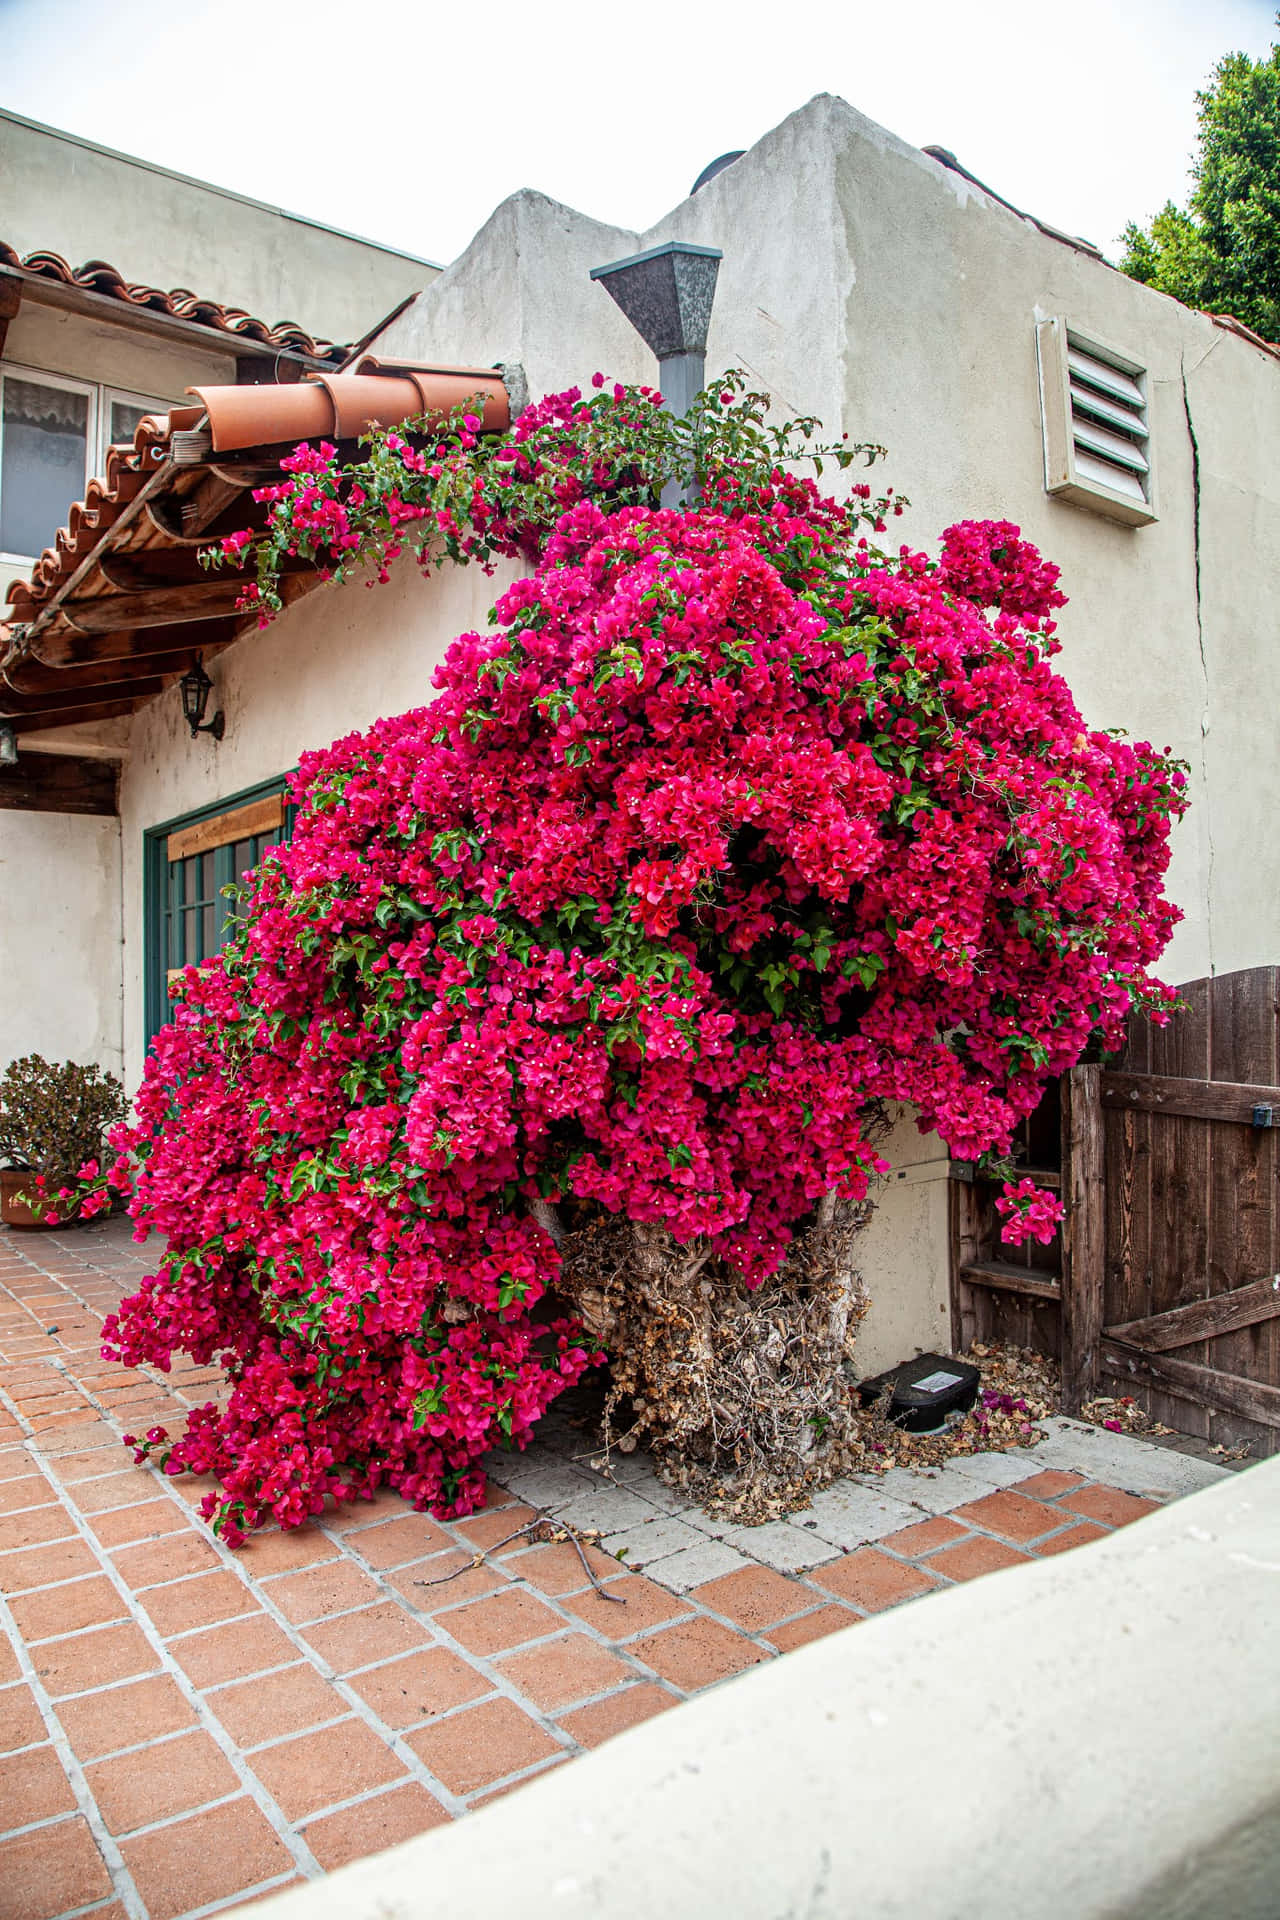 Brightening up any garden with its vibrant purple bracts and green leaves, Bougainvillea is a beautiful flowering plant.